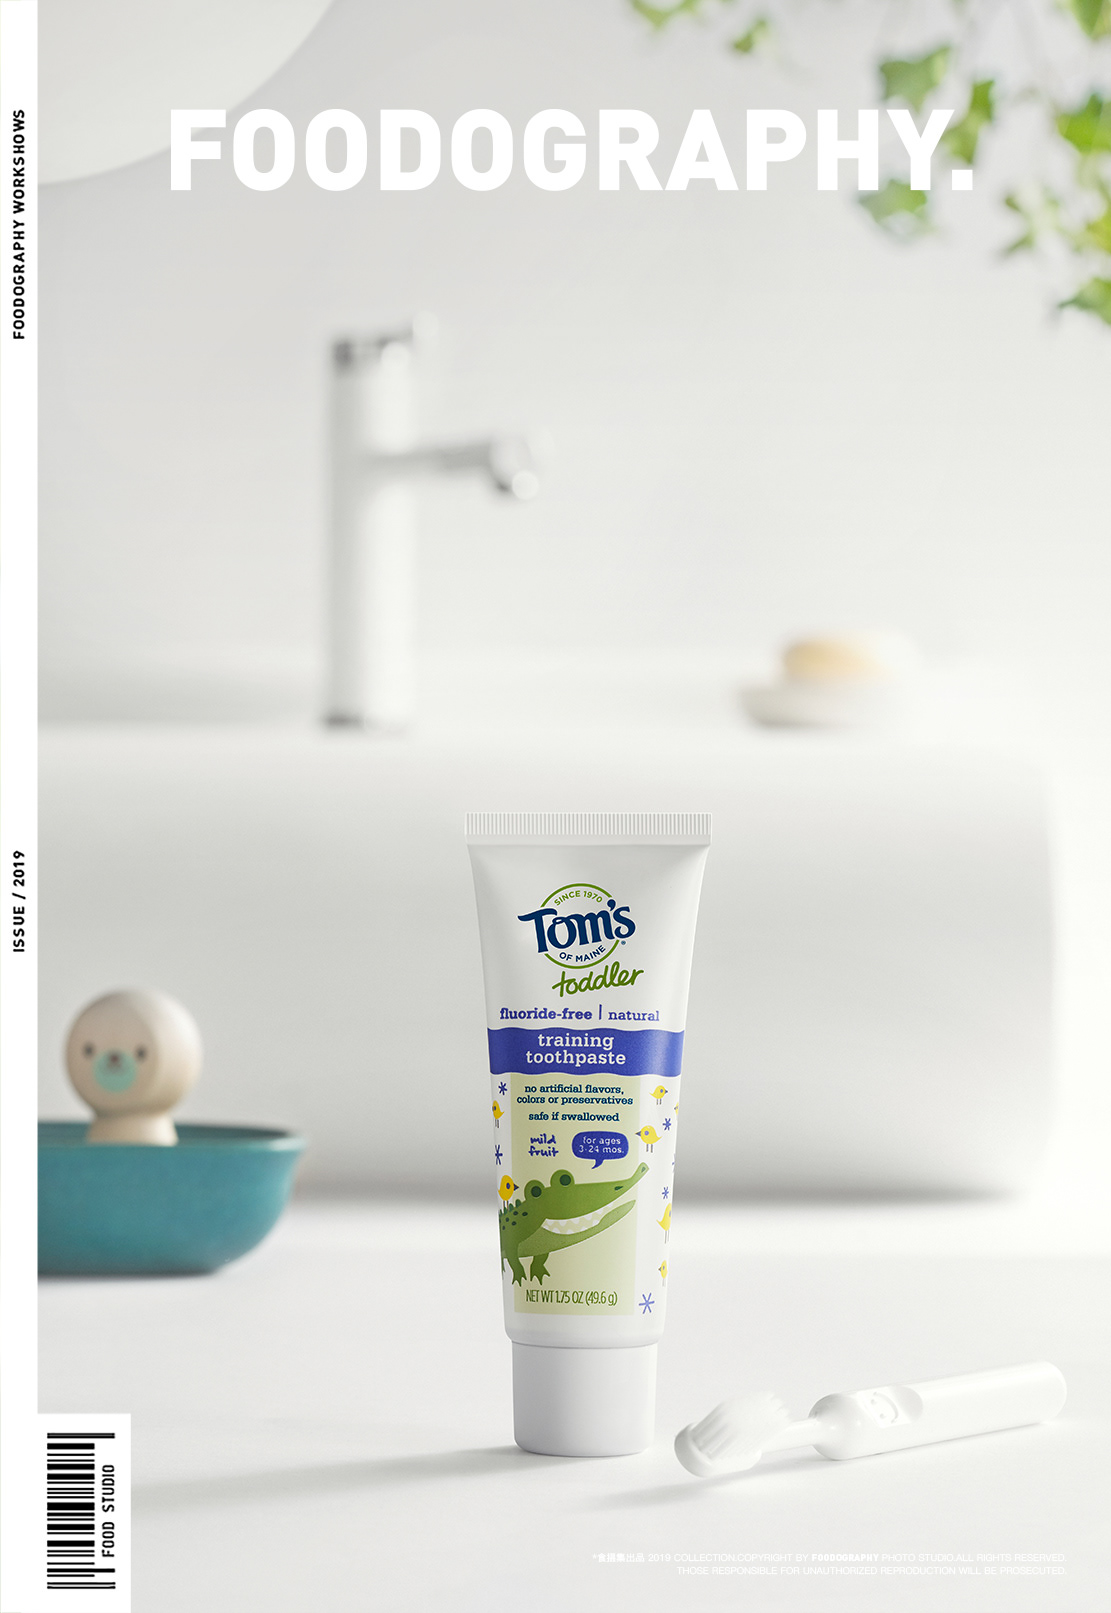 Fashion  photo Photography  toothpaste 产品摄影 牙膏摄影 电商摄影 美妆摄影